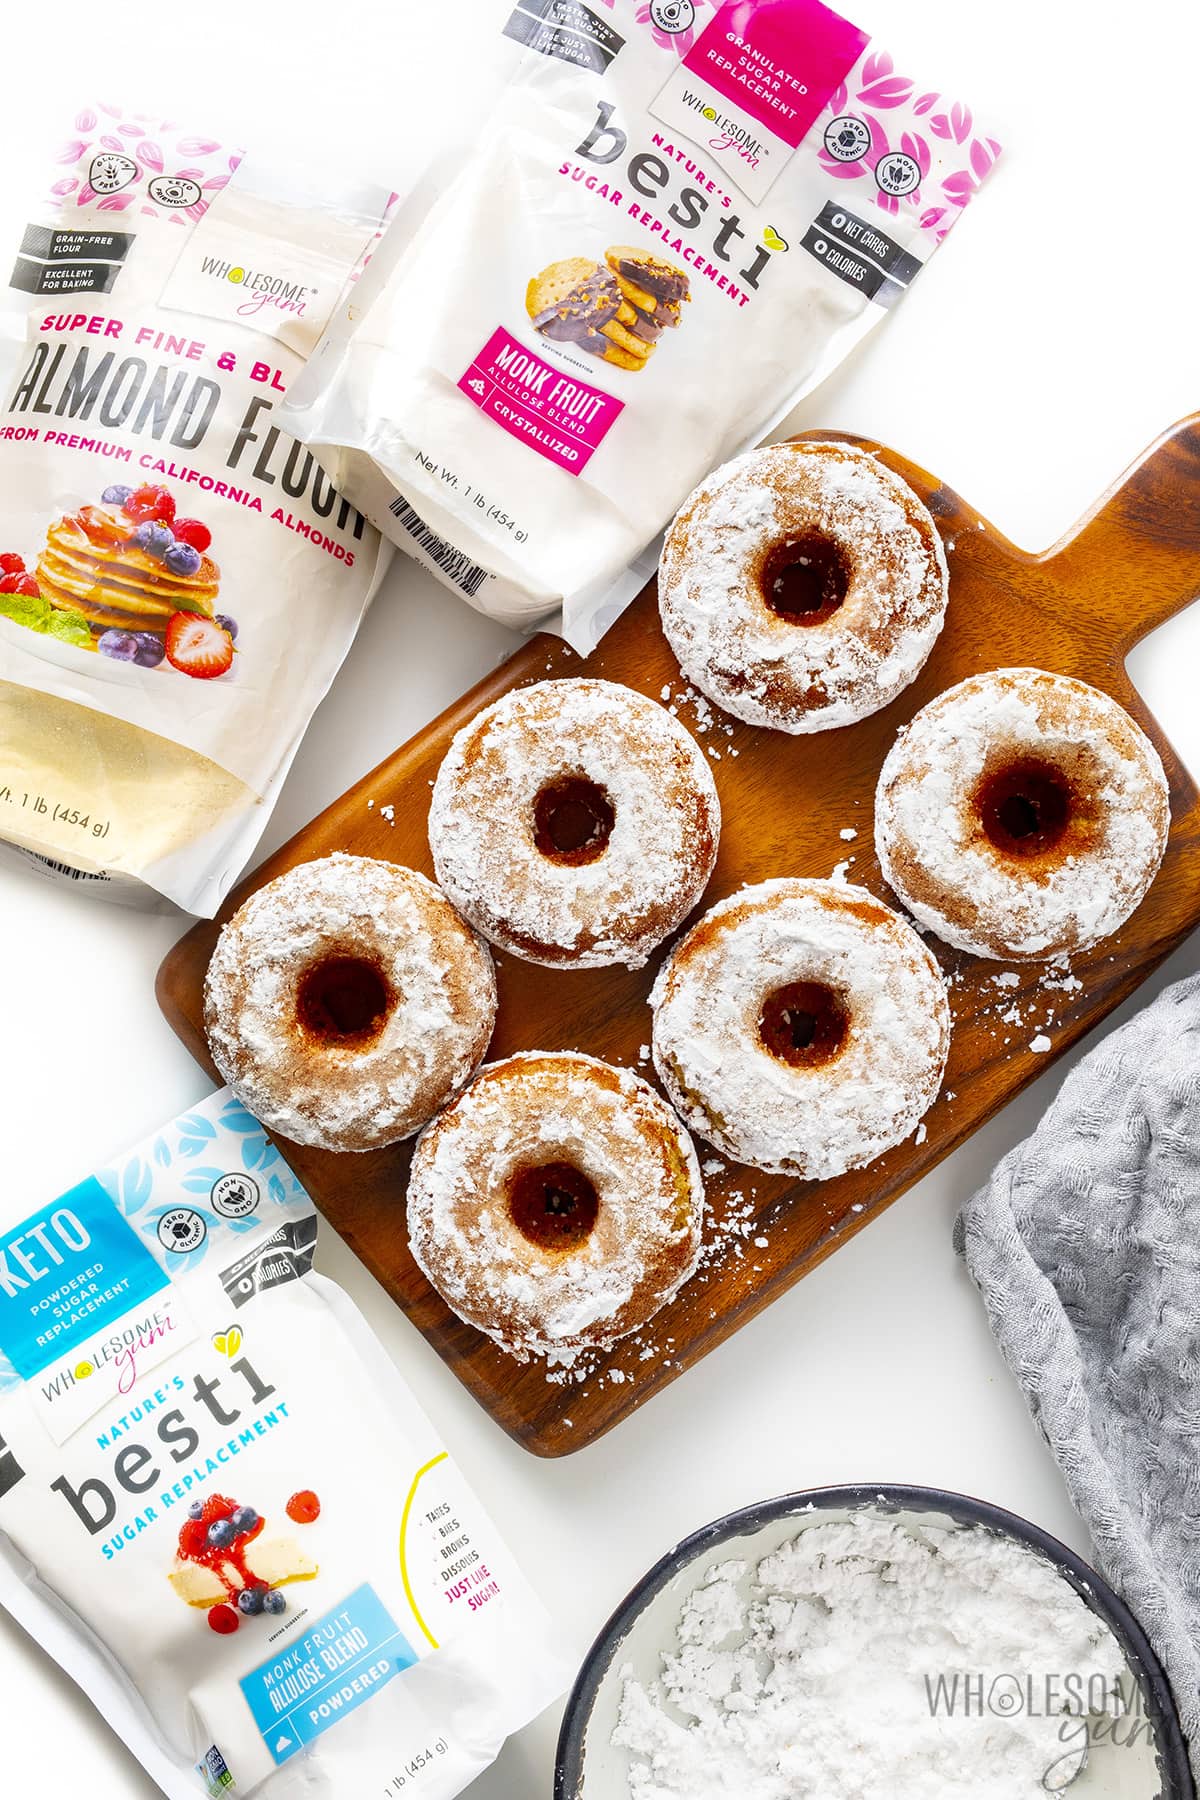 Sugar-free donuts with almond flour and Besti.